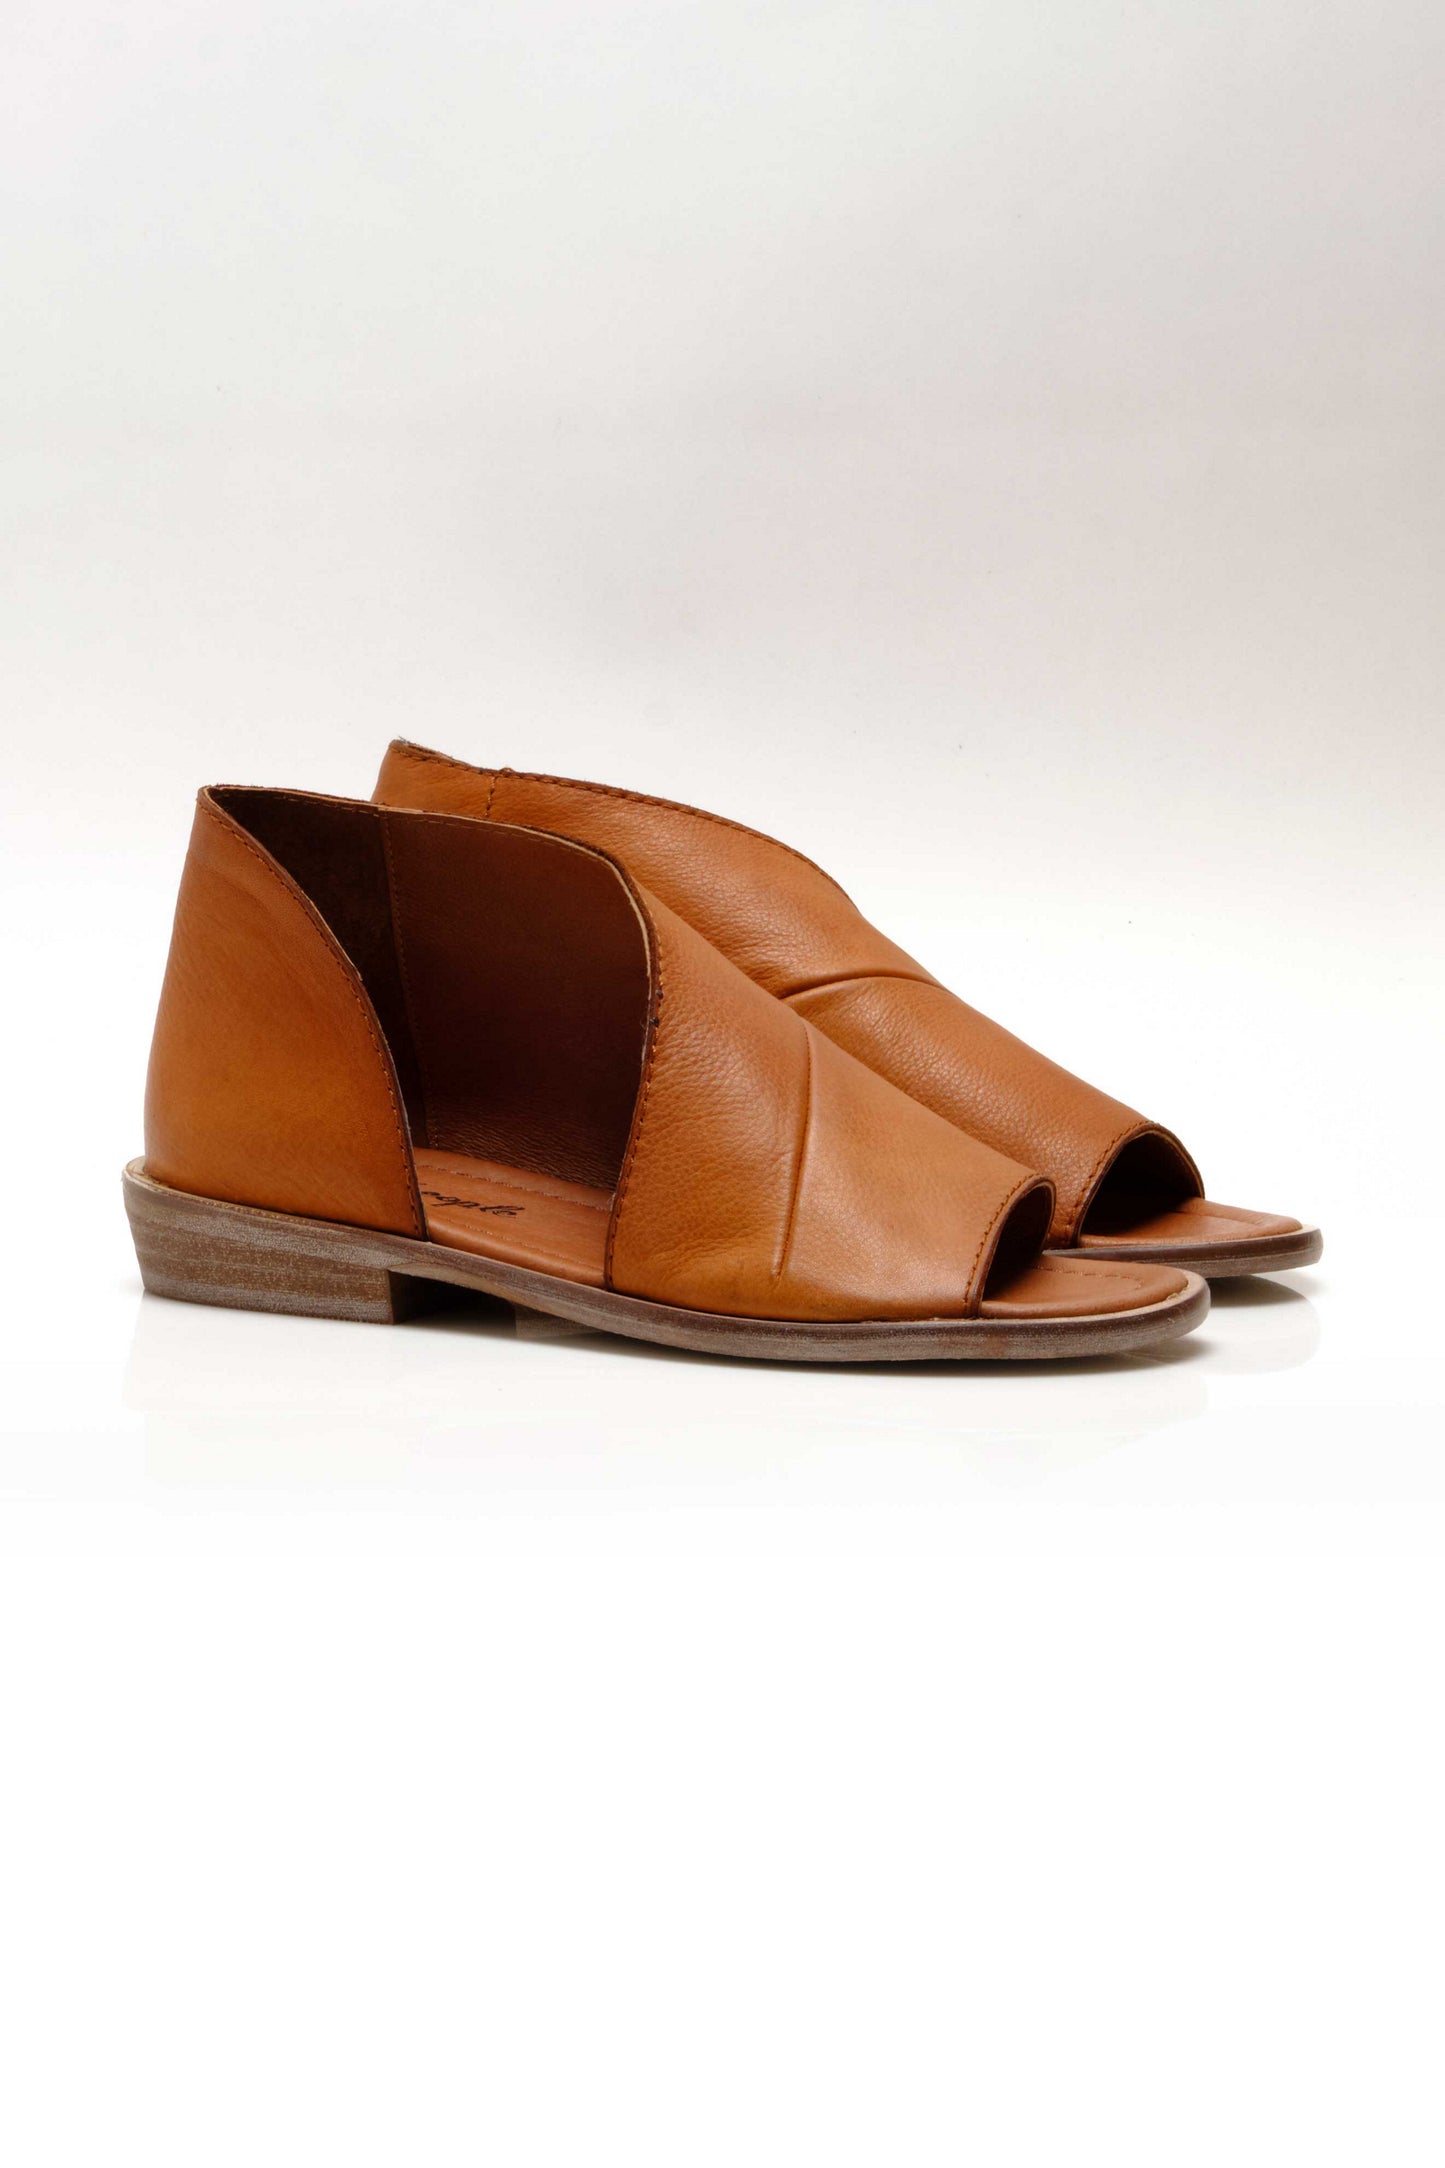 Free People's Mont Blanc Sandal in Tan Leather